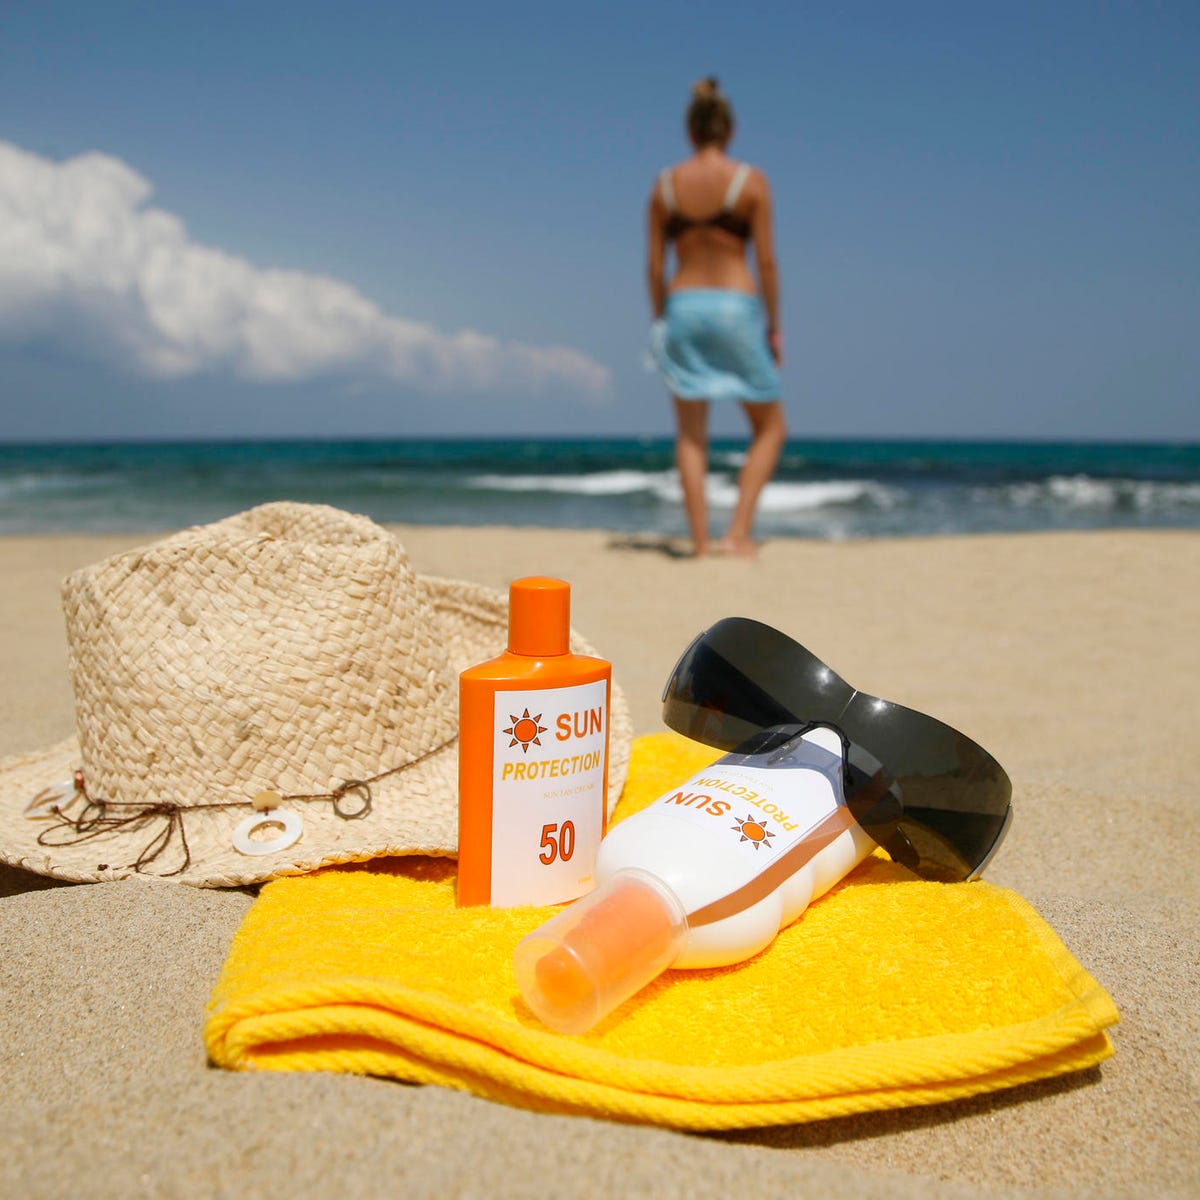 This one app can protect you against skin cancer, and it's already